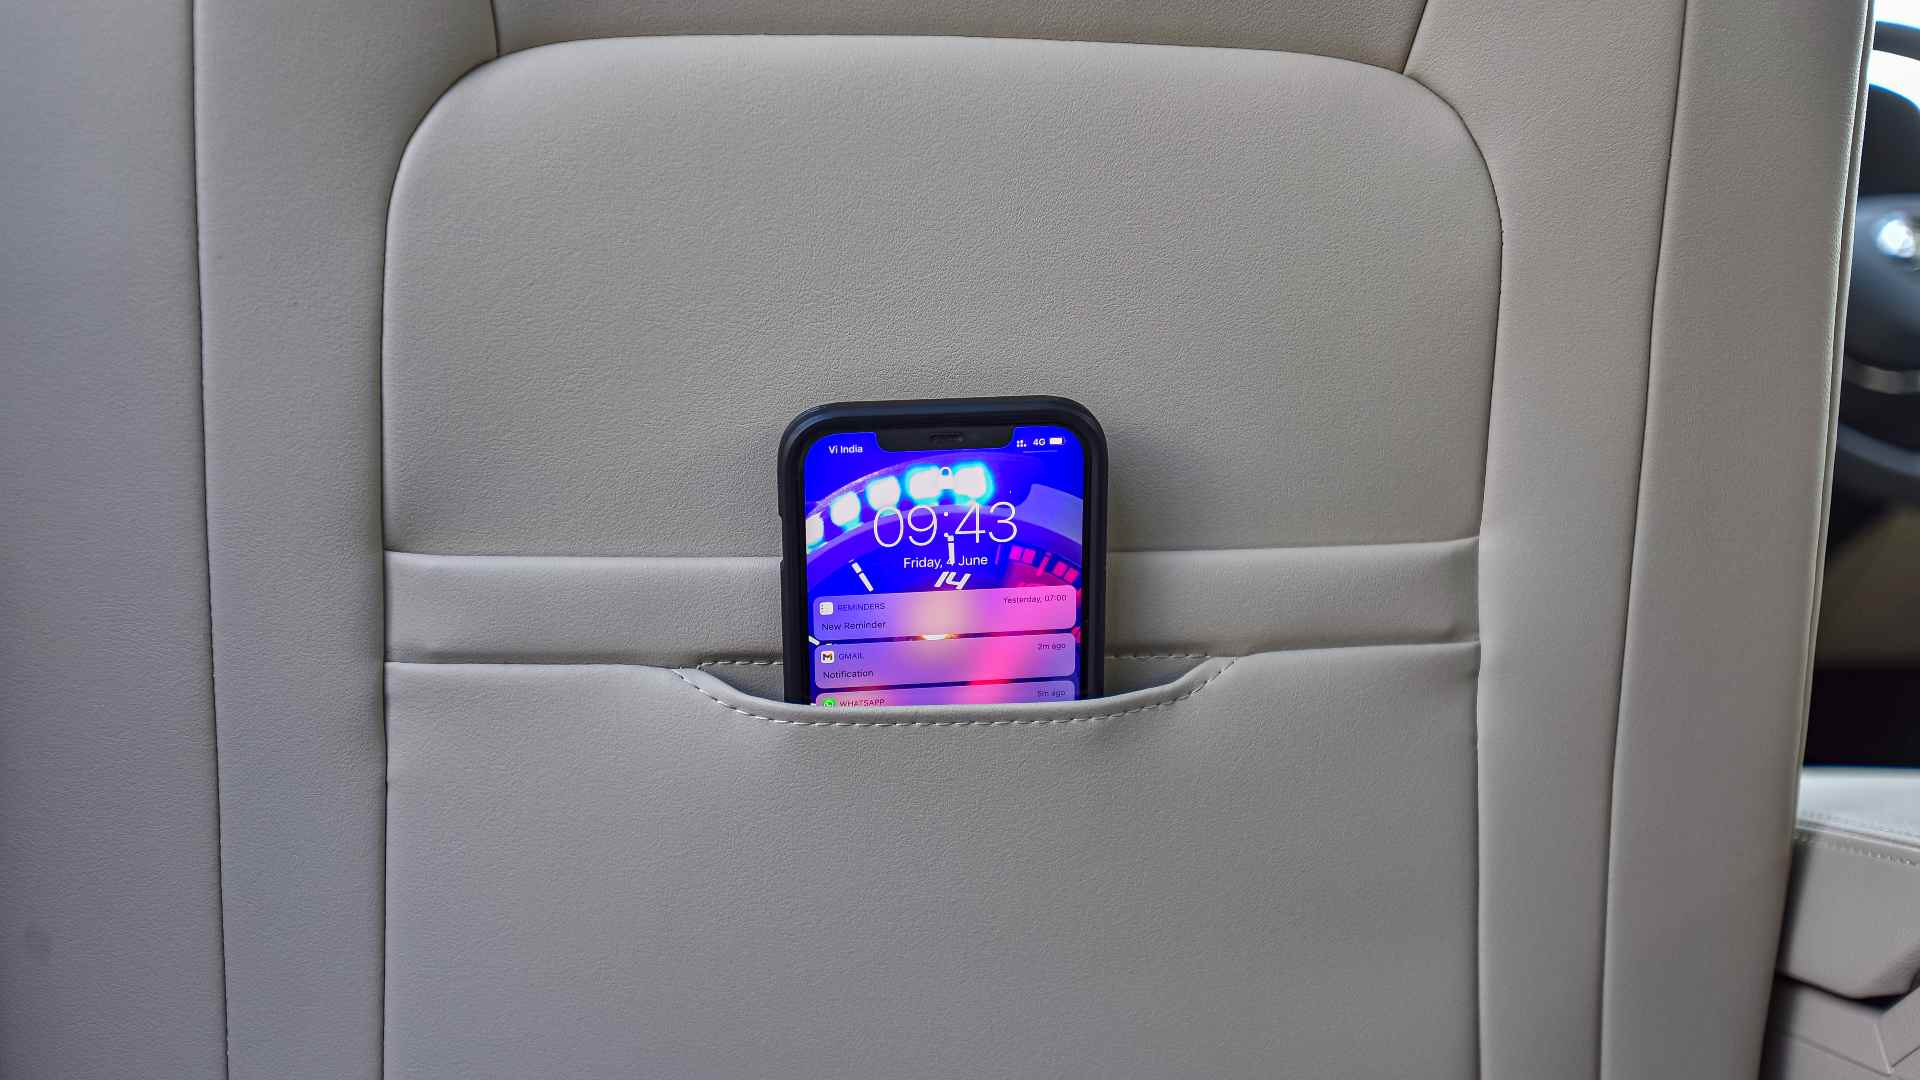 Subtle smartphone pocket is one of several thoughtful touches inside the 2021 Skoda Octavia. Image: Overdrive/Anis Shaikh